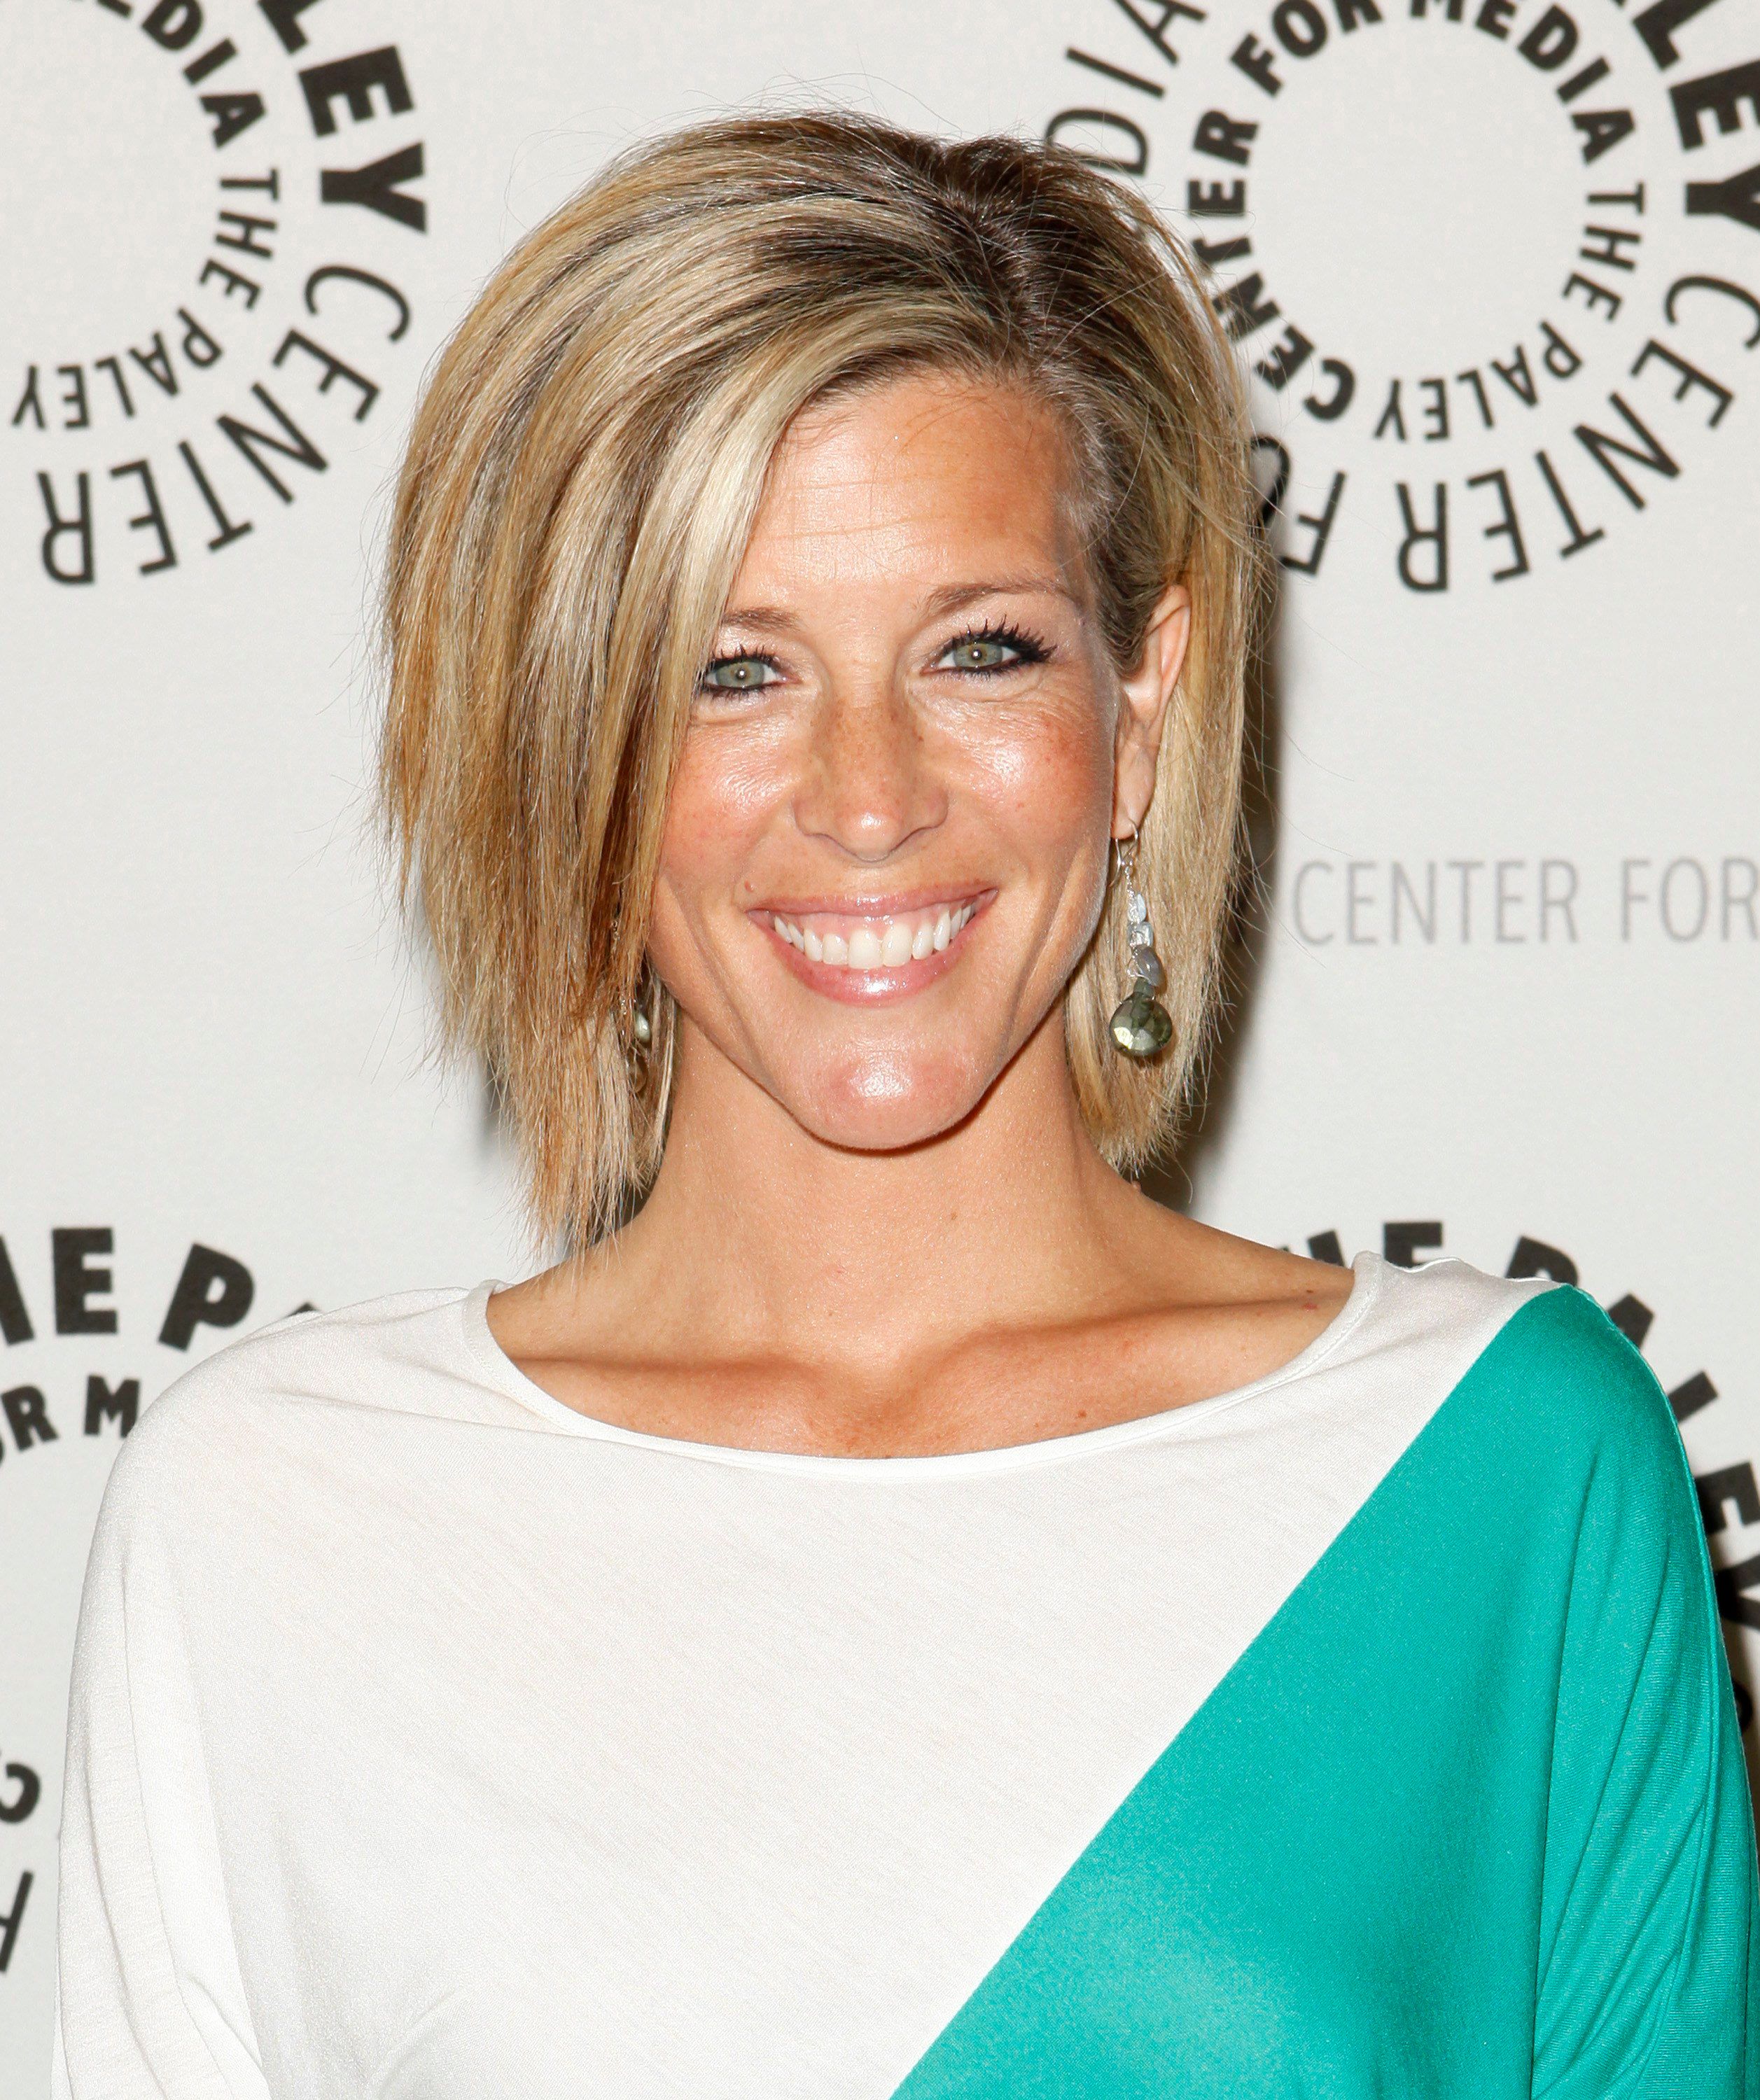 10 Things You Didn't Know About General Hospital Star Laura Wright